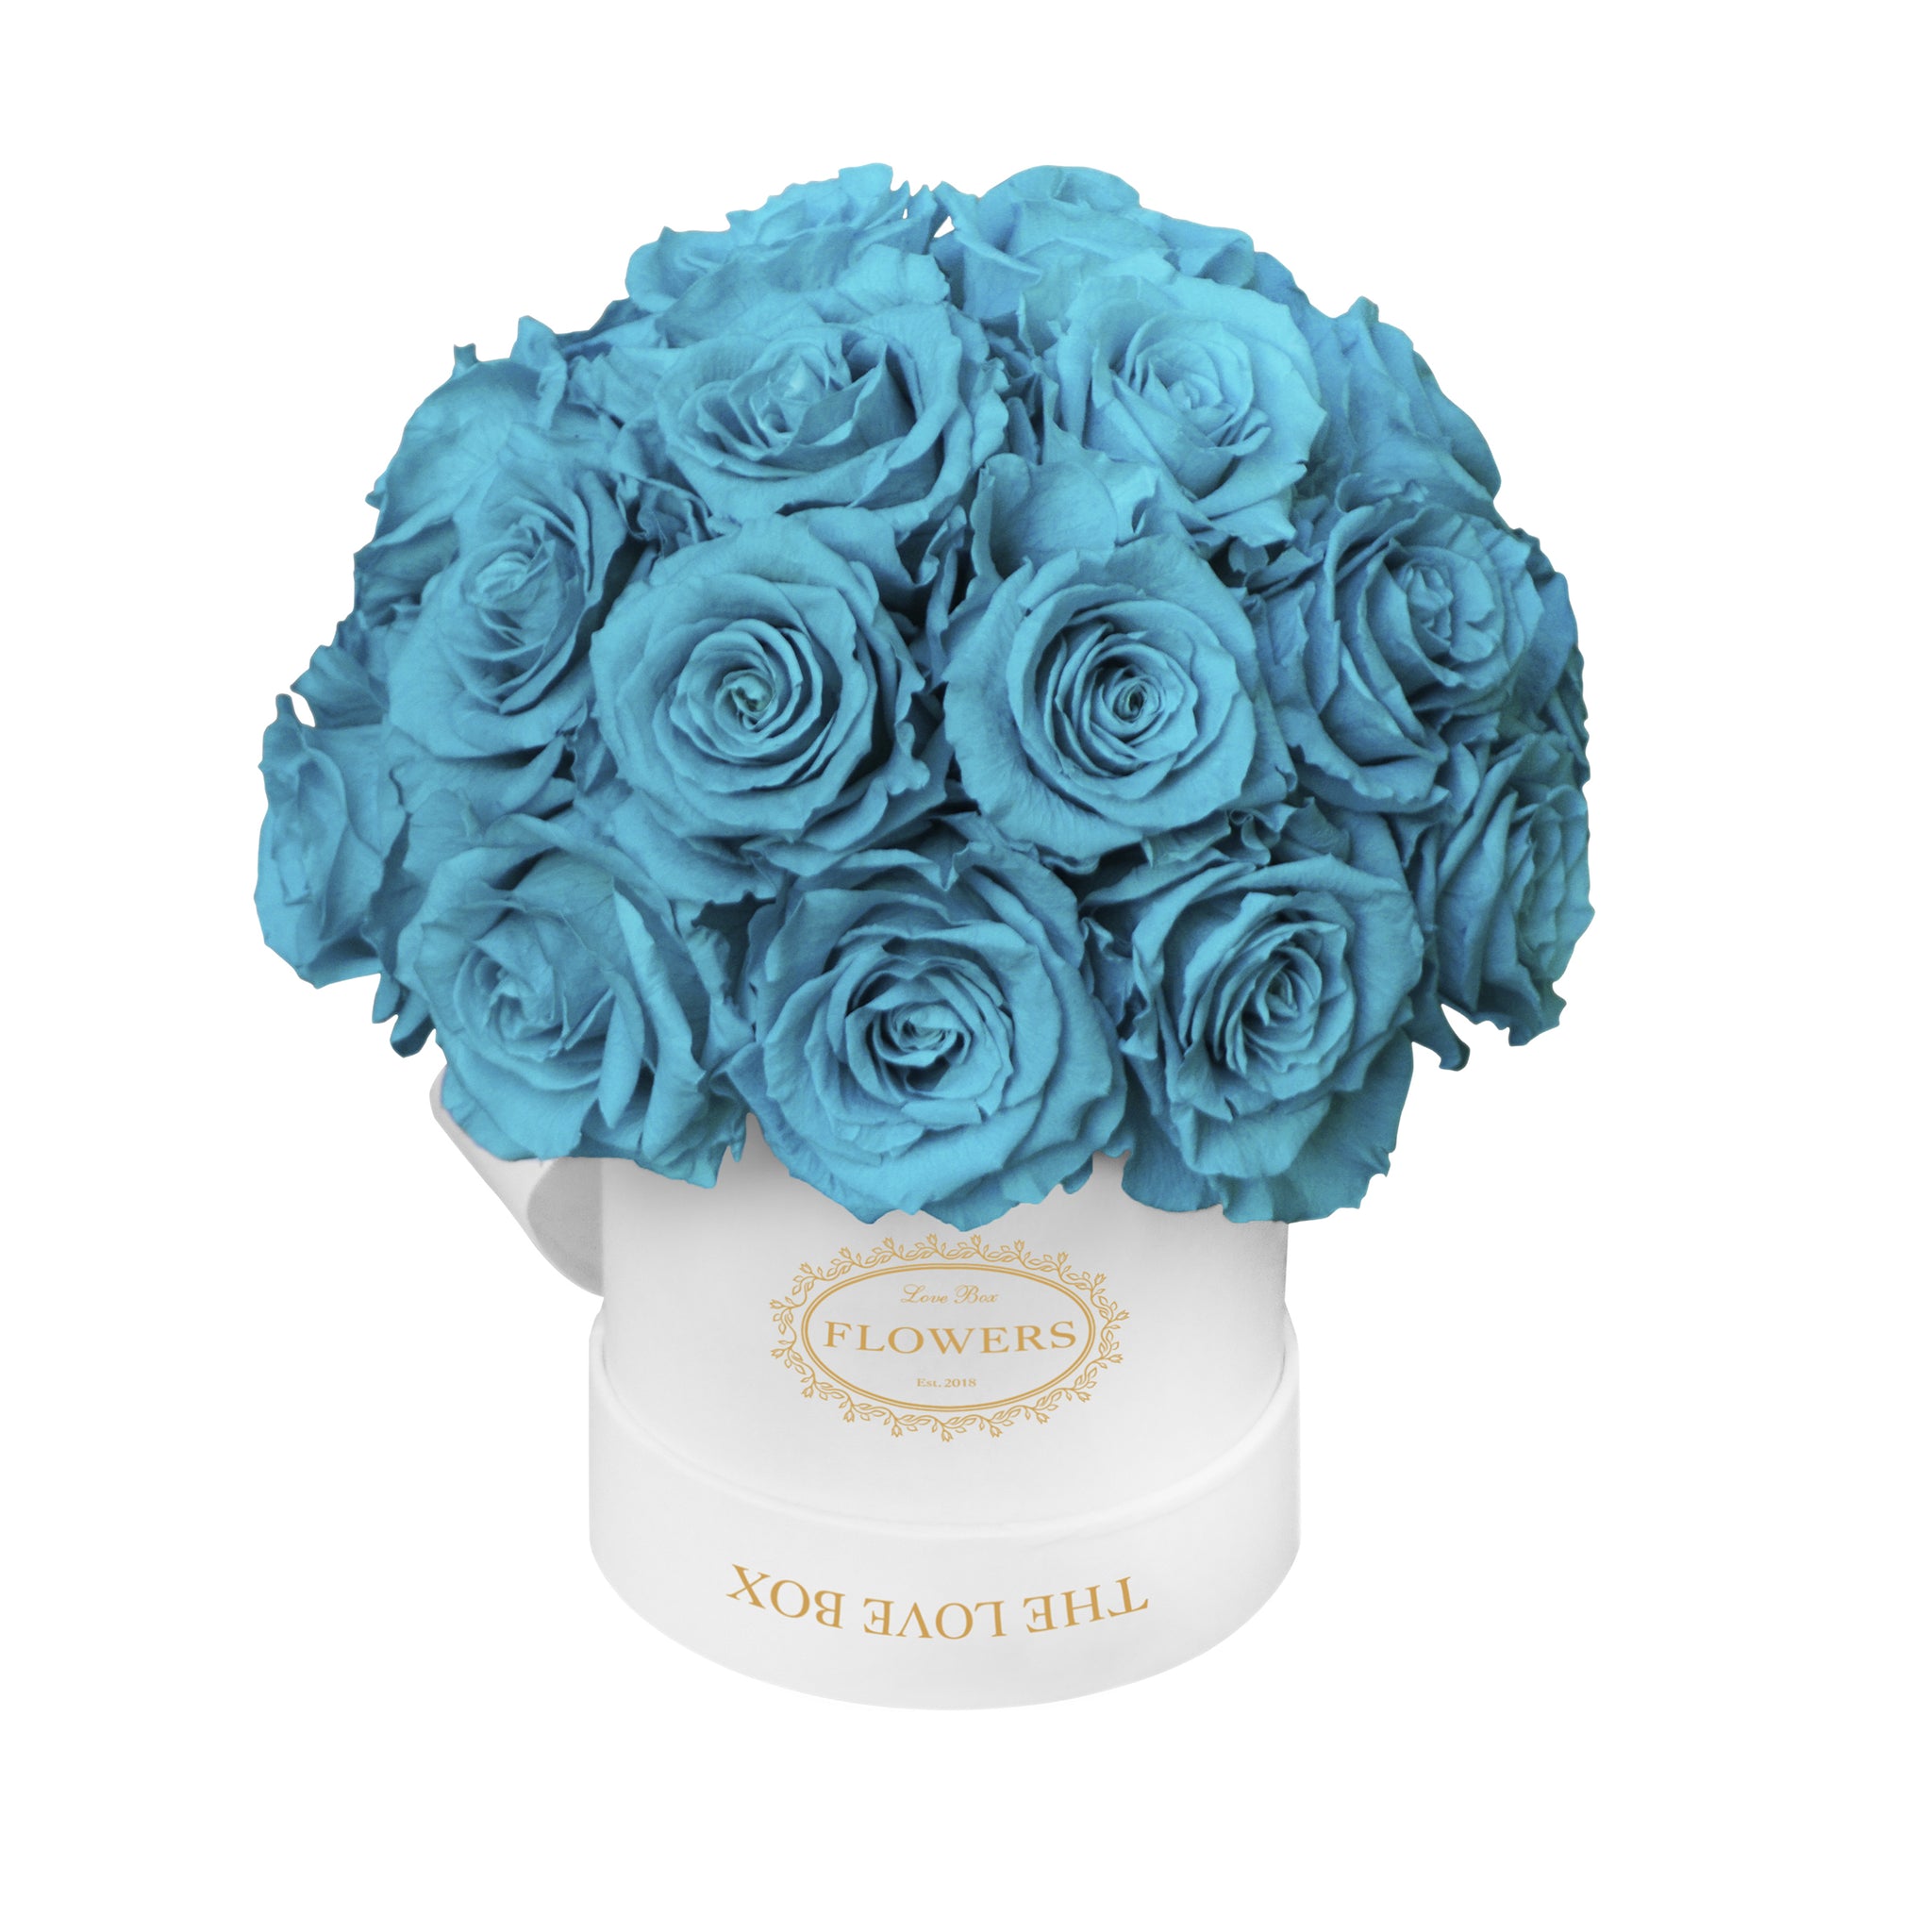 I LOVE YOU Preserved Roses Box - Vegas Flowers Delivery